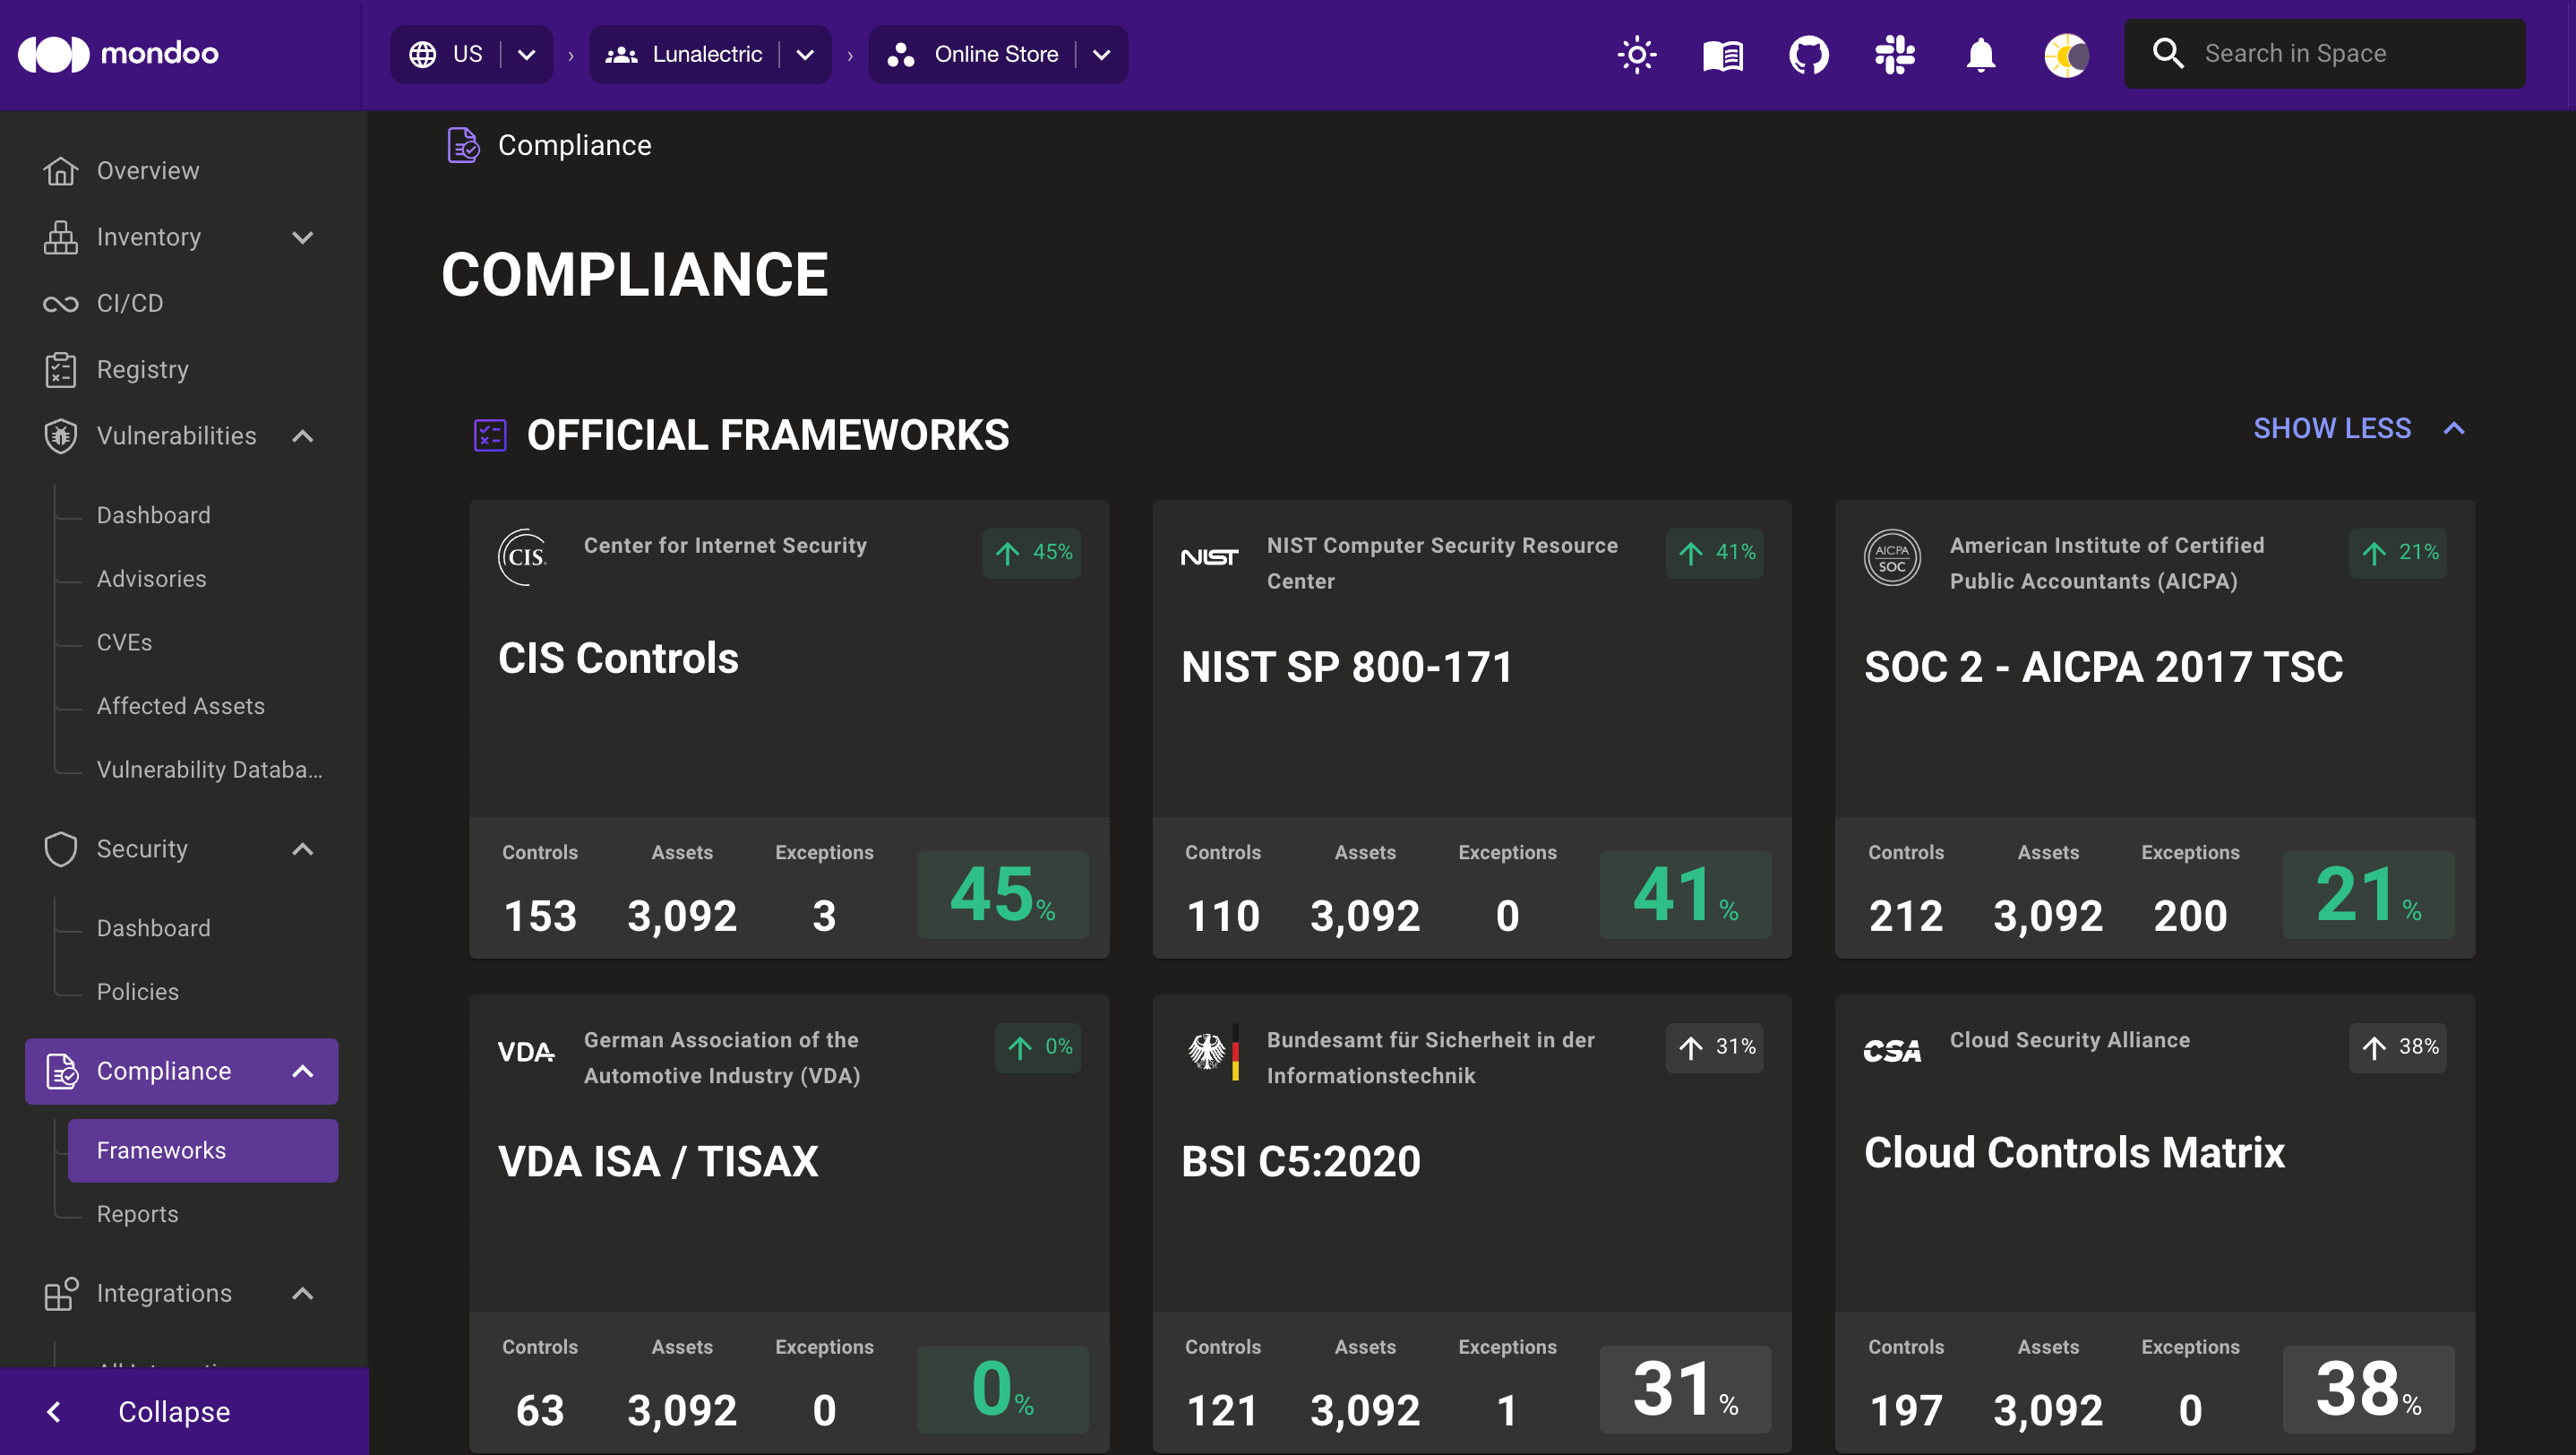 Compliance in the Mondoo Console